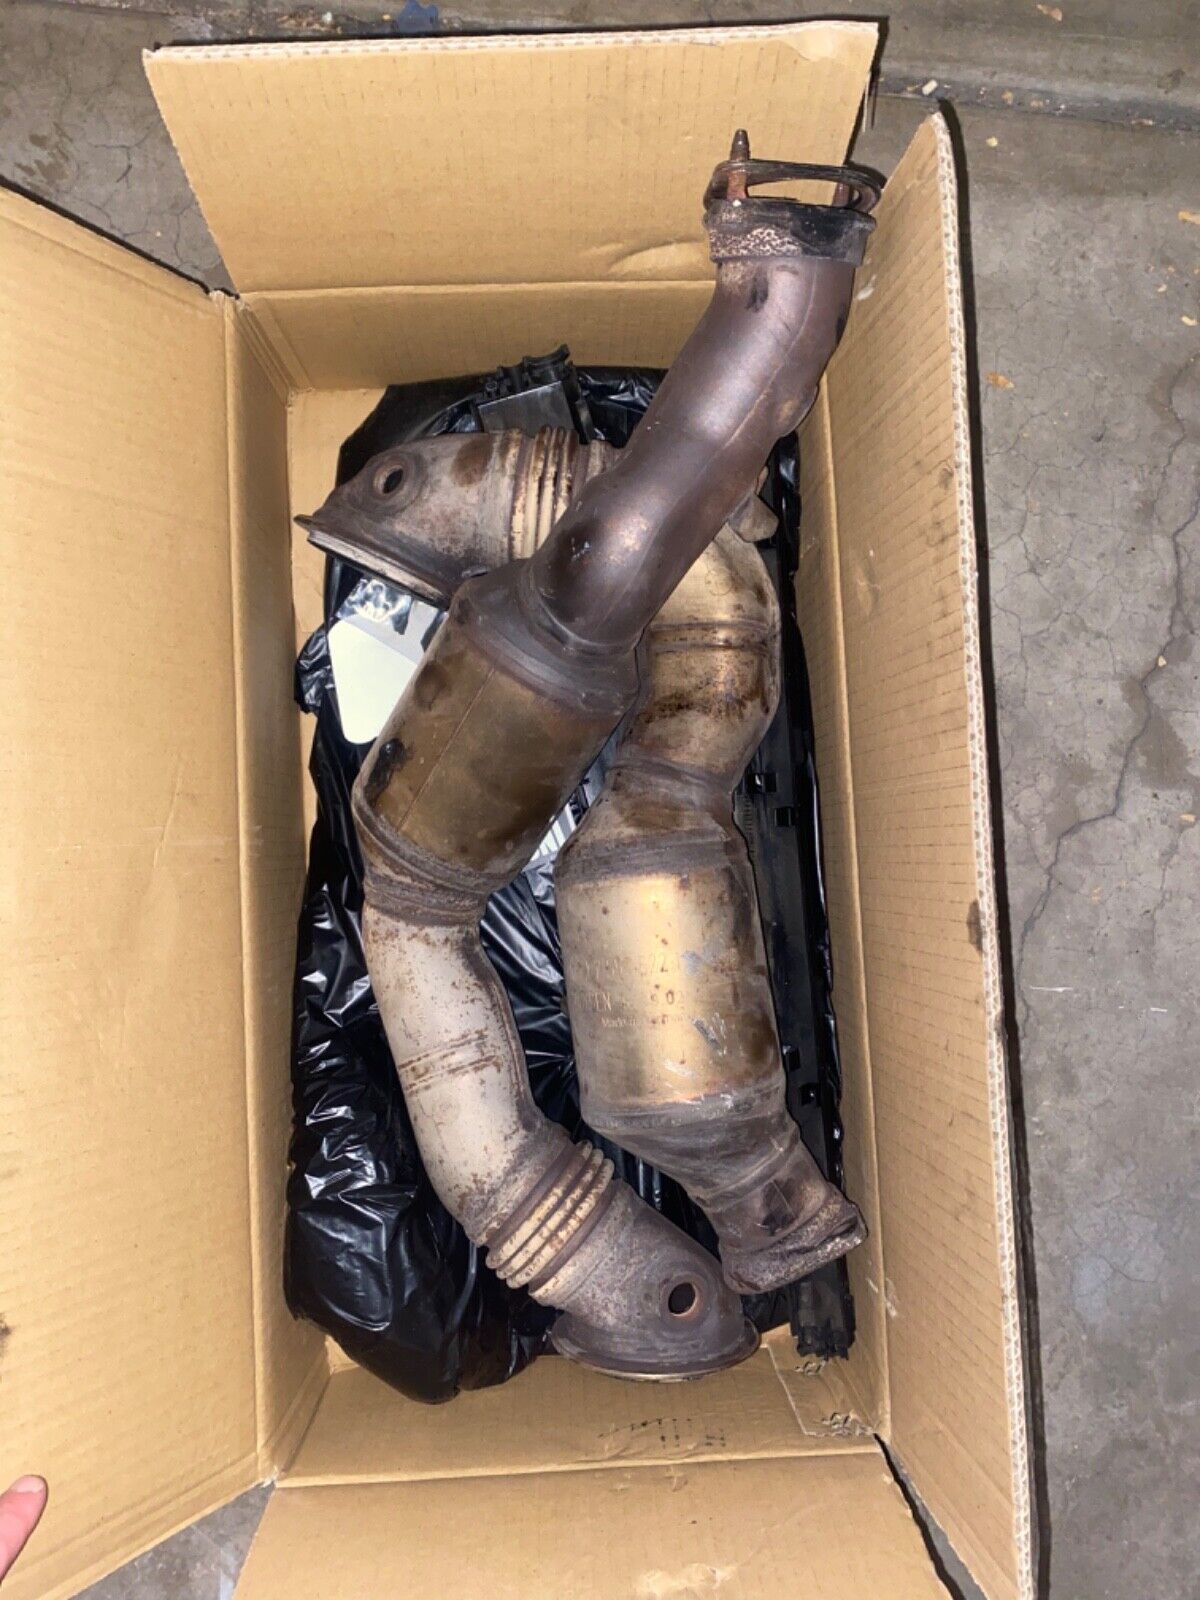 e90 335xi N54 Stock Downpipes(Catalytic Converters)